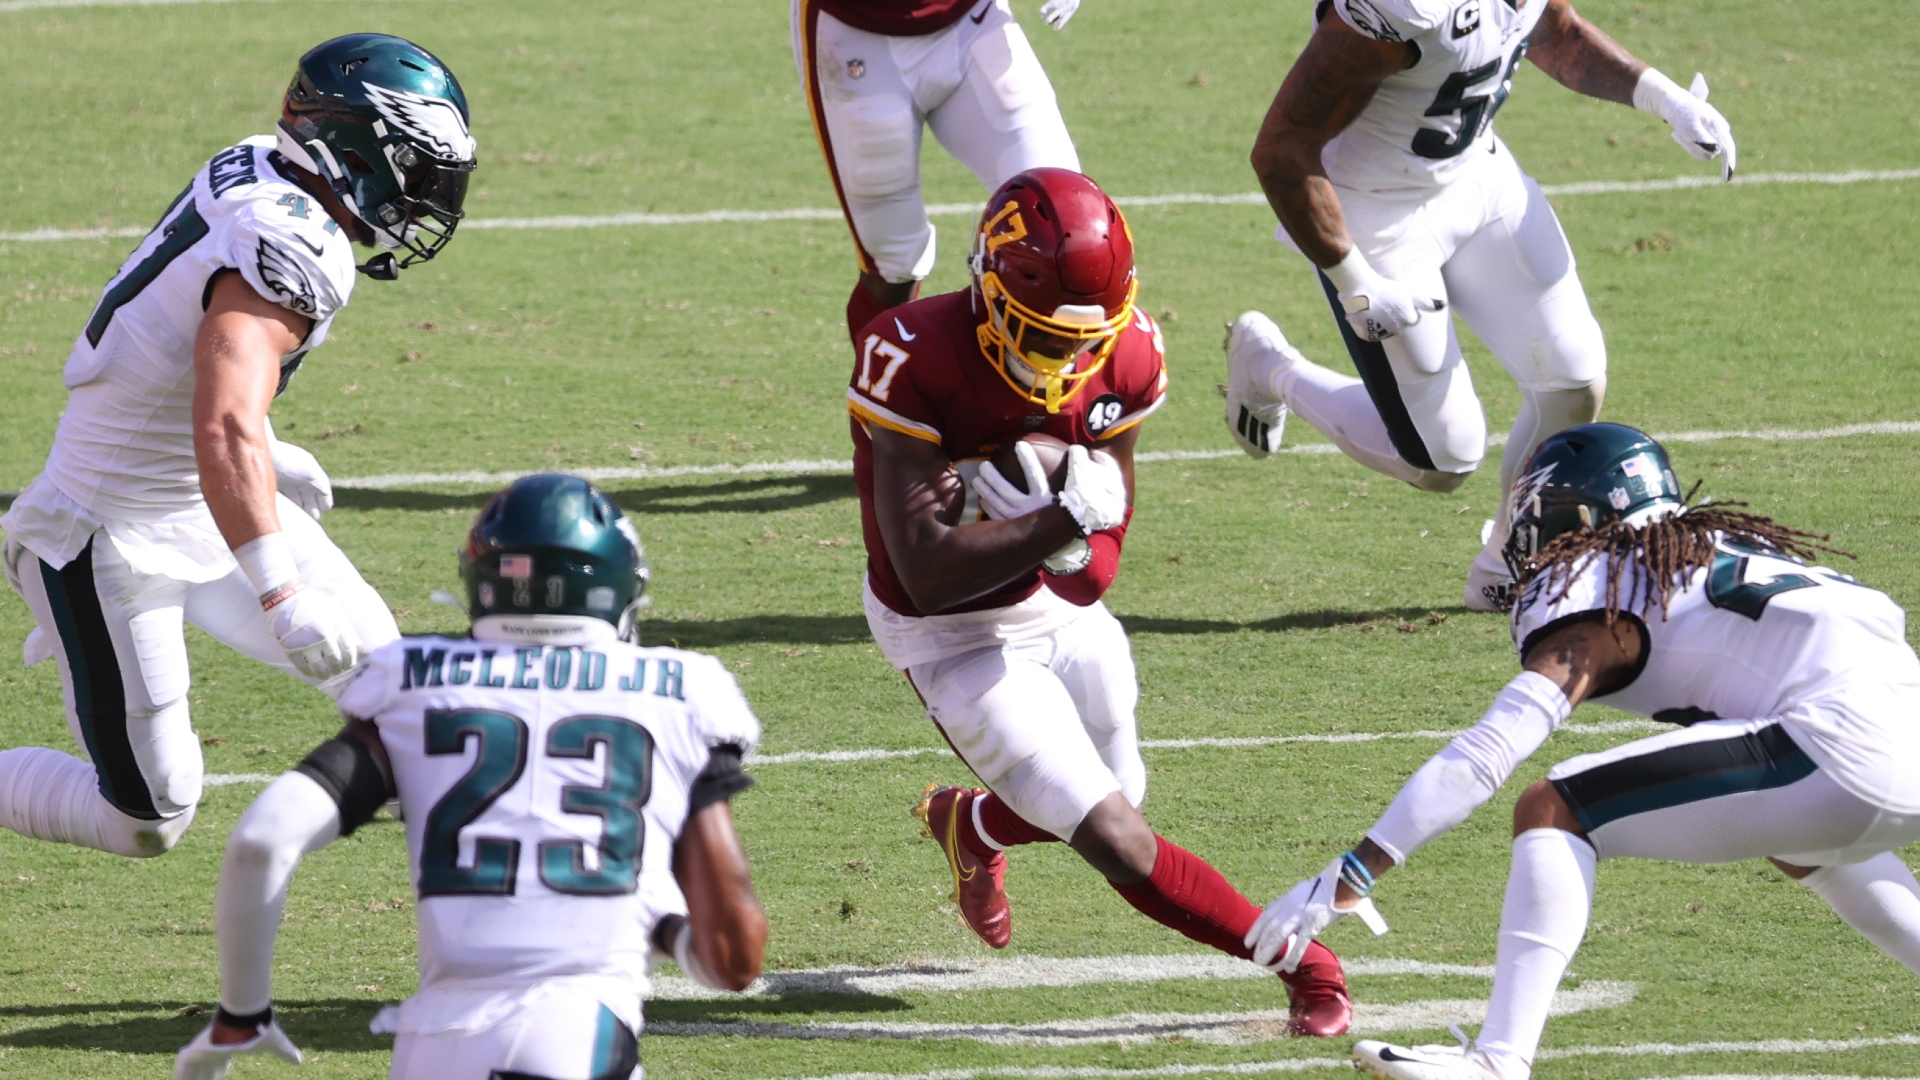 Terry McLaurin catches a pass against the Eagles